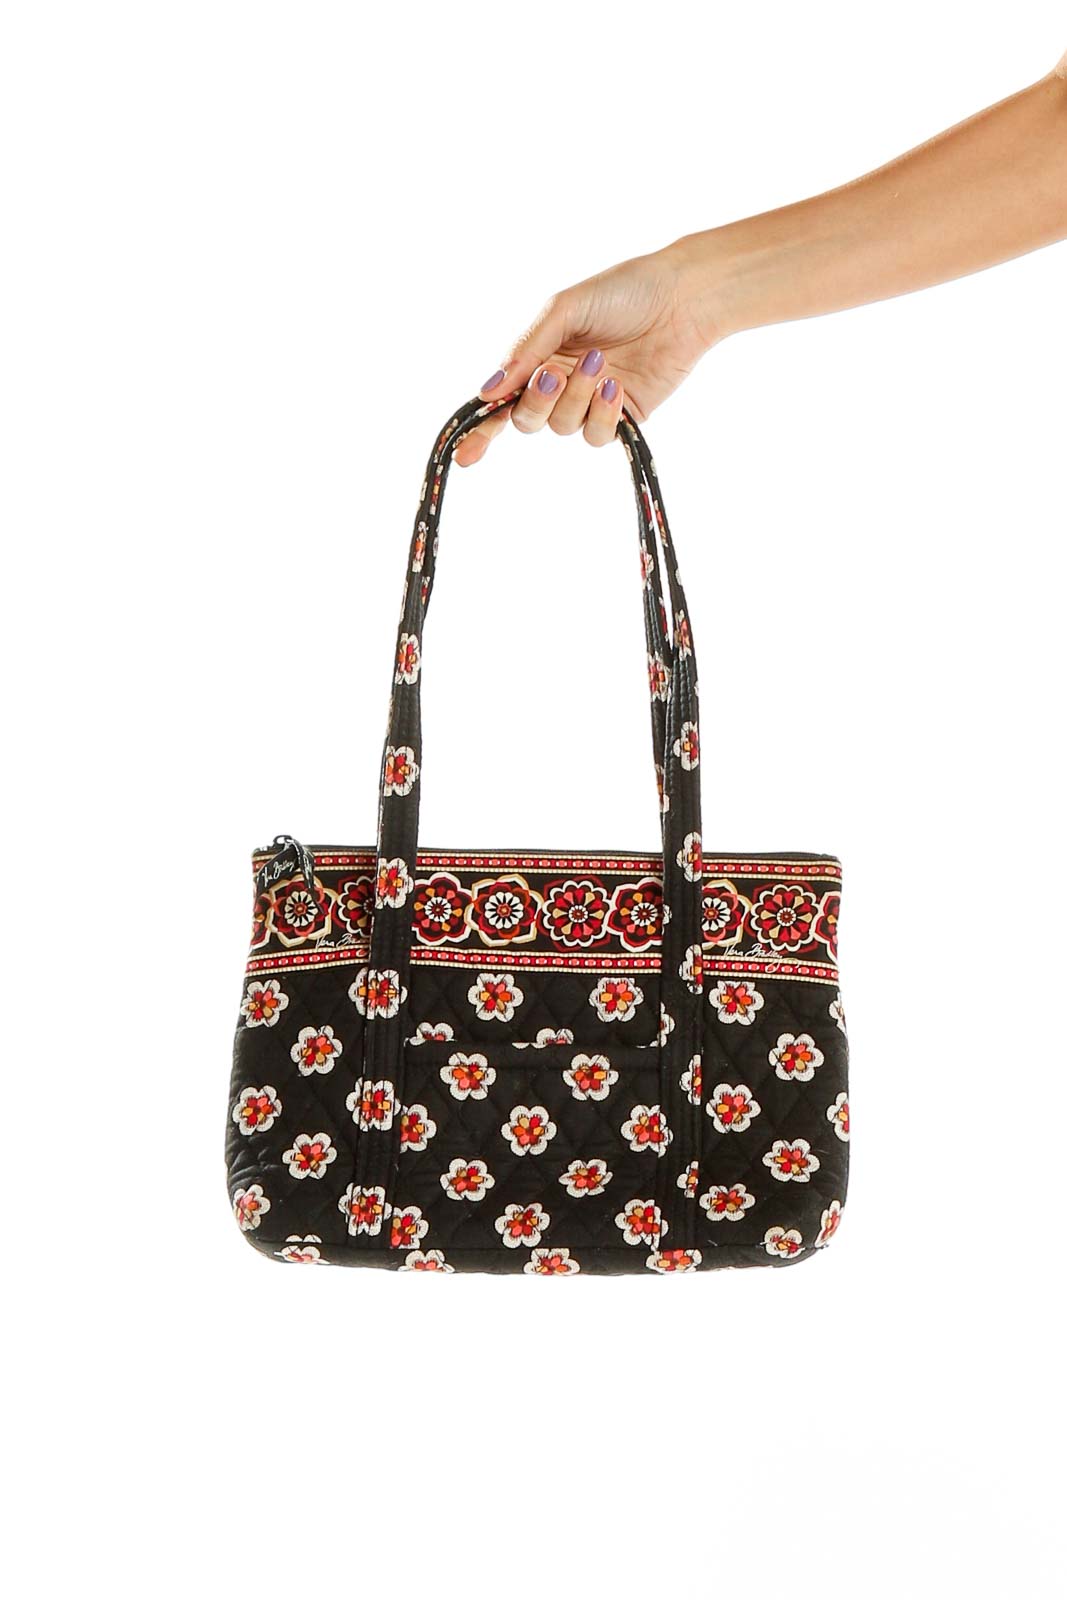 Black Quilted Print Bag Front